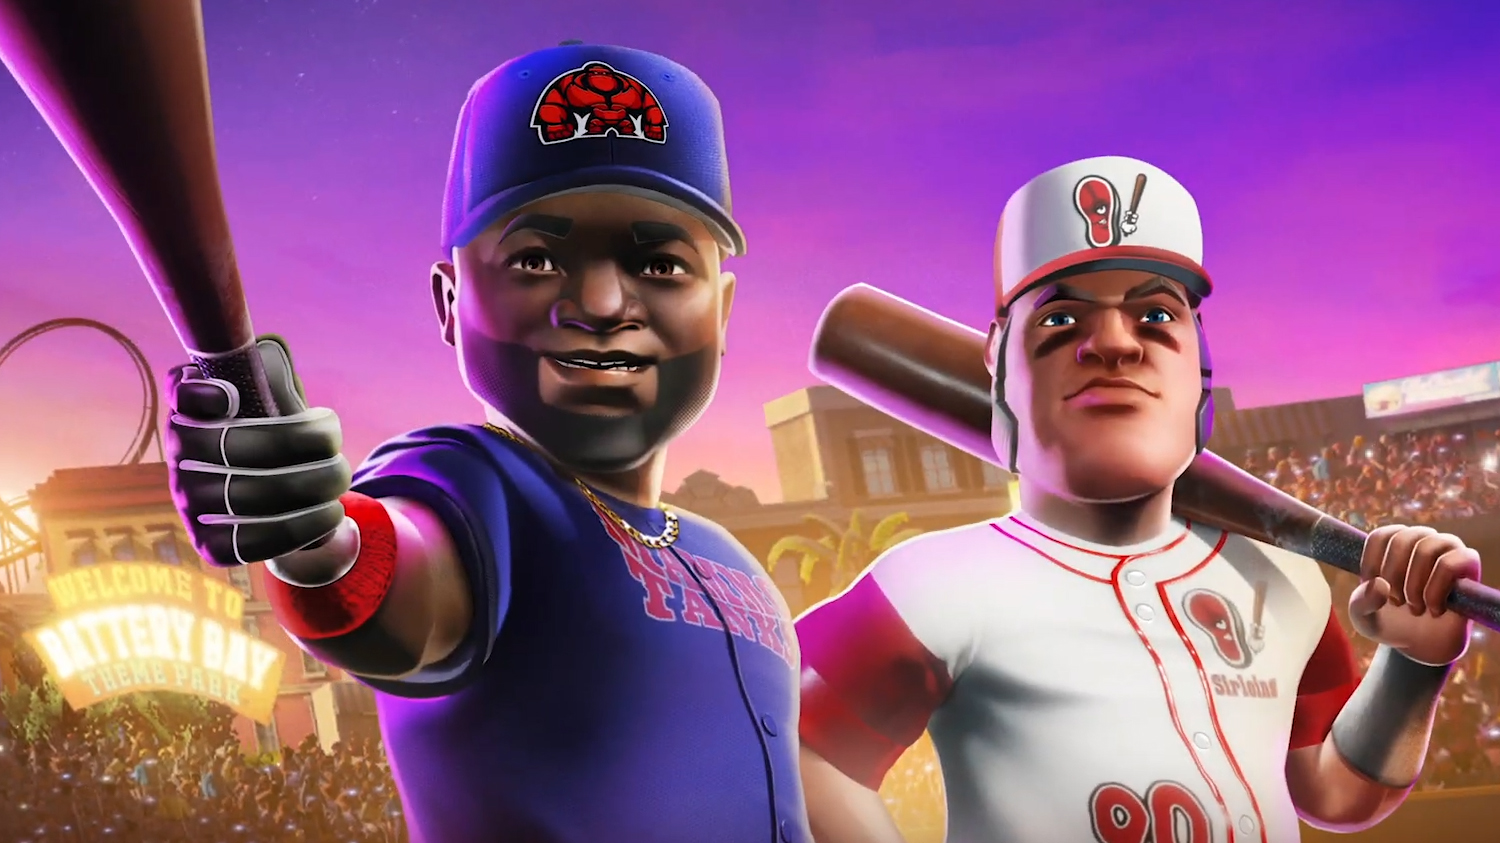 Super Mega Baseball 2 Release Date Announced With Gameplay Video